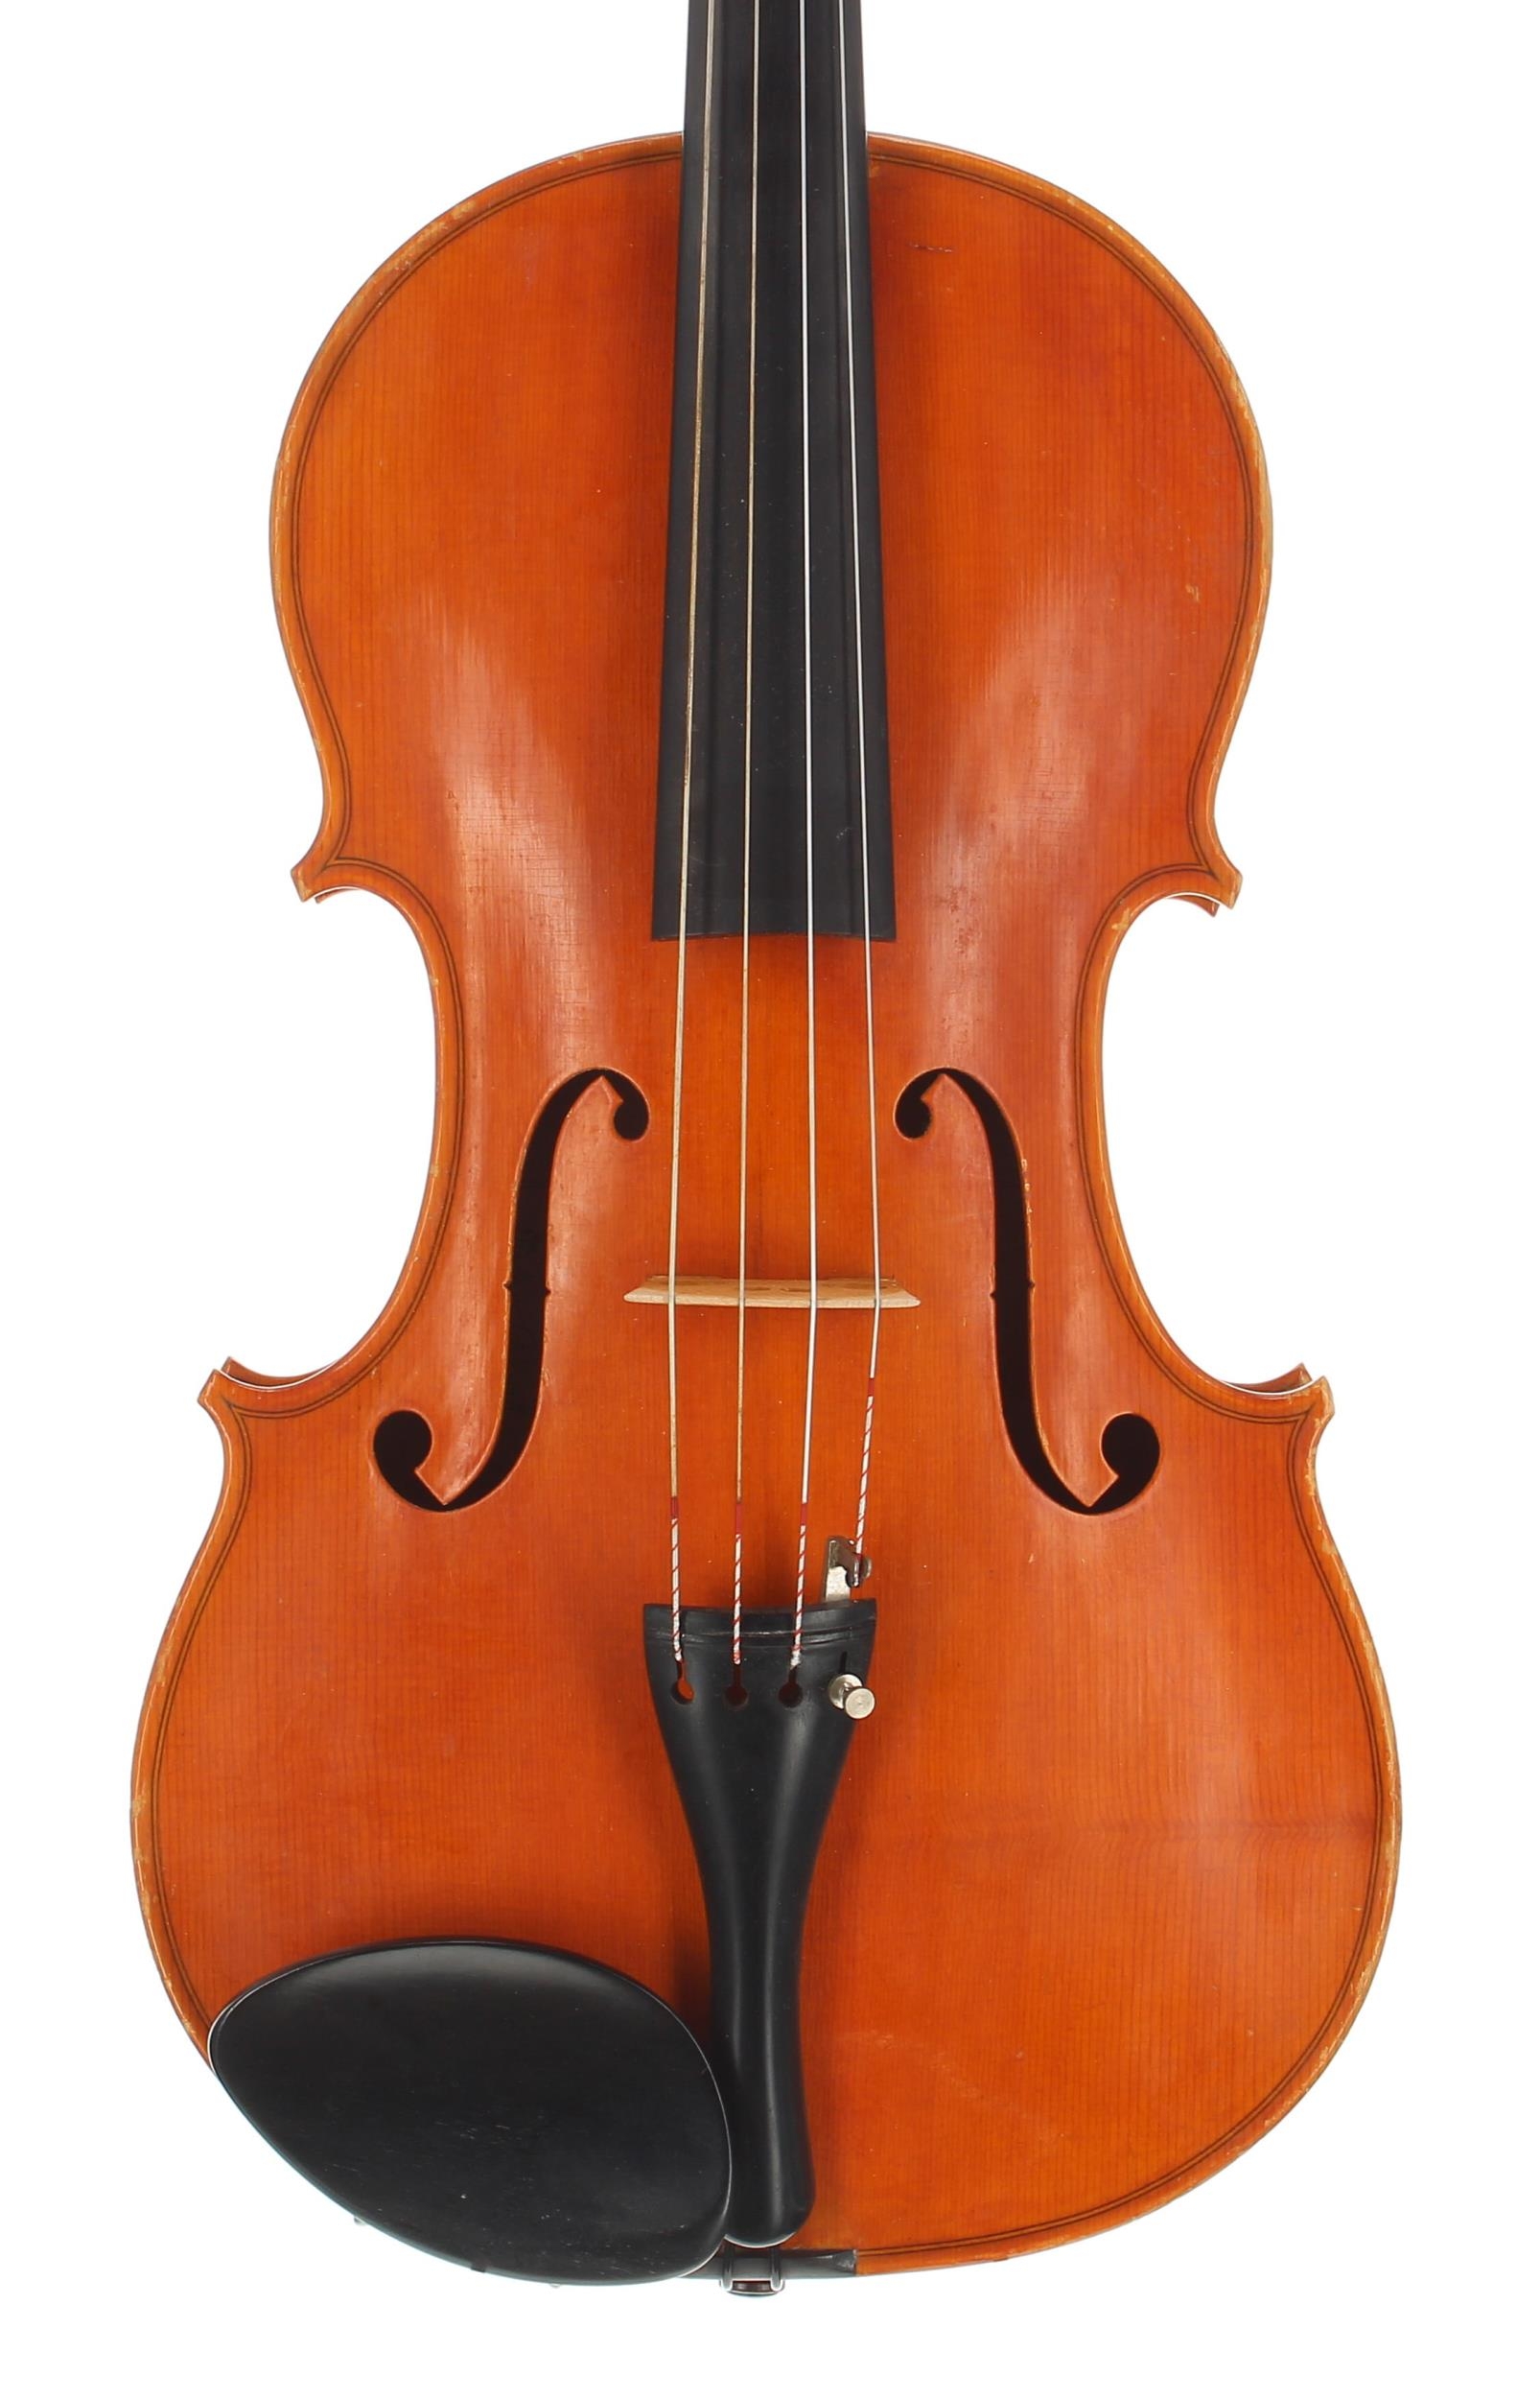 Good contemporary English viola by and labelled Rowan Armour-Brown, Made in Cornwall, 1976, the